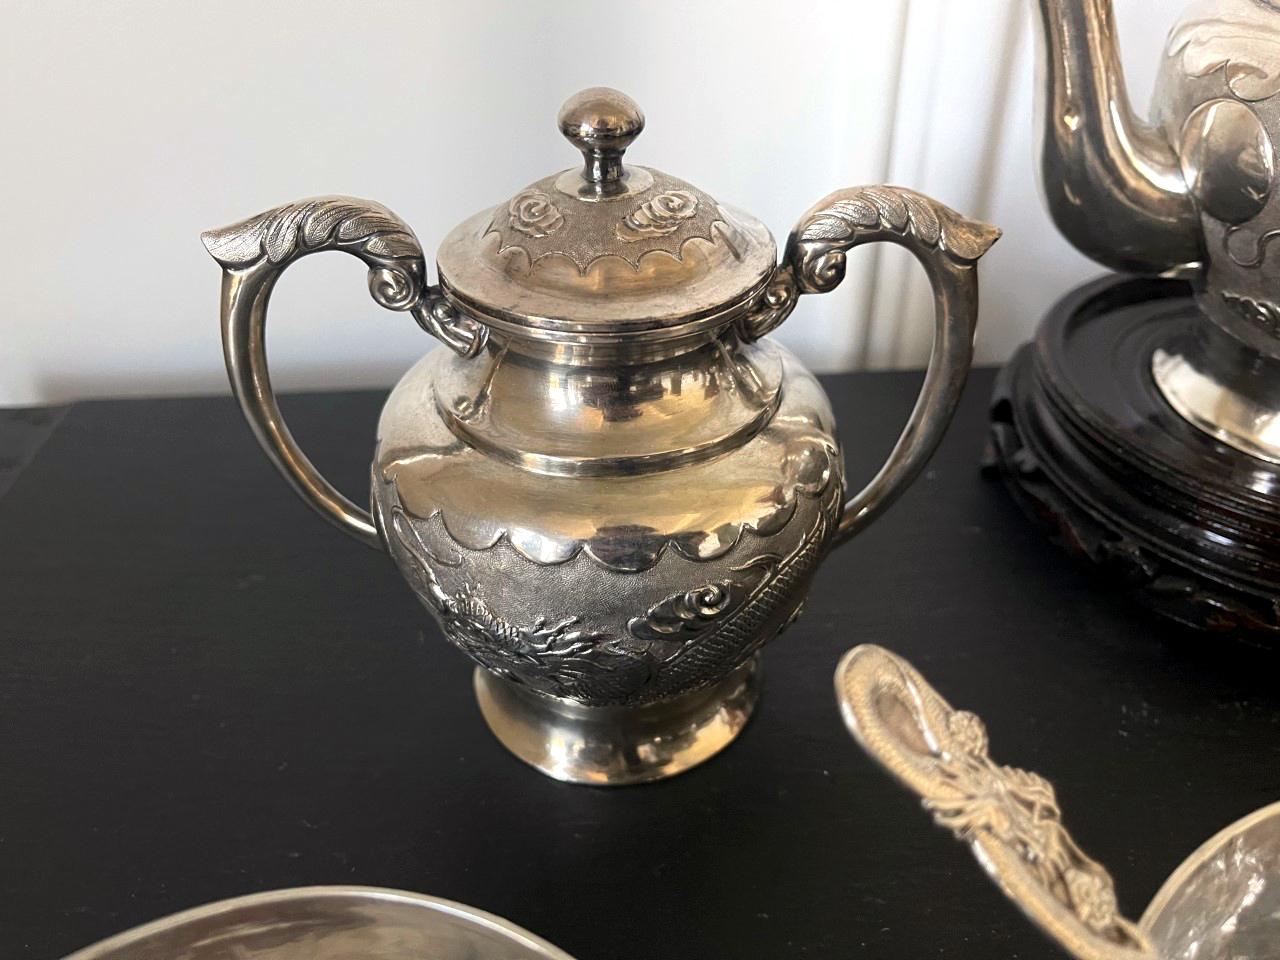 Rare Chinese Export Sterling Silver Tea Set with Dragon Design Tianjing Wuhua For Sale 2